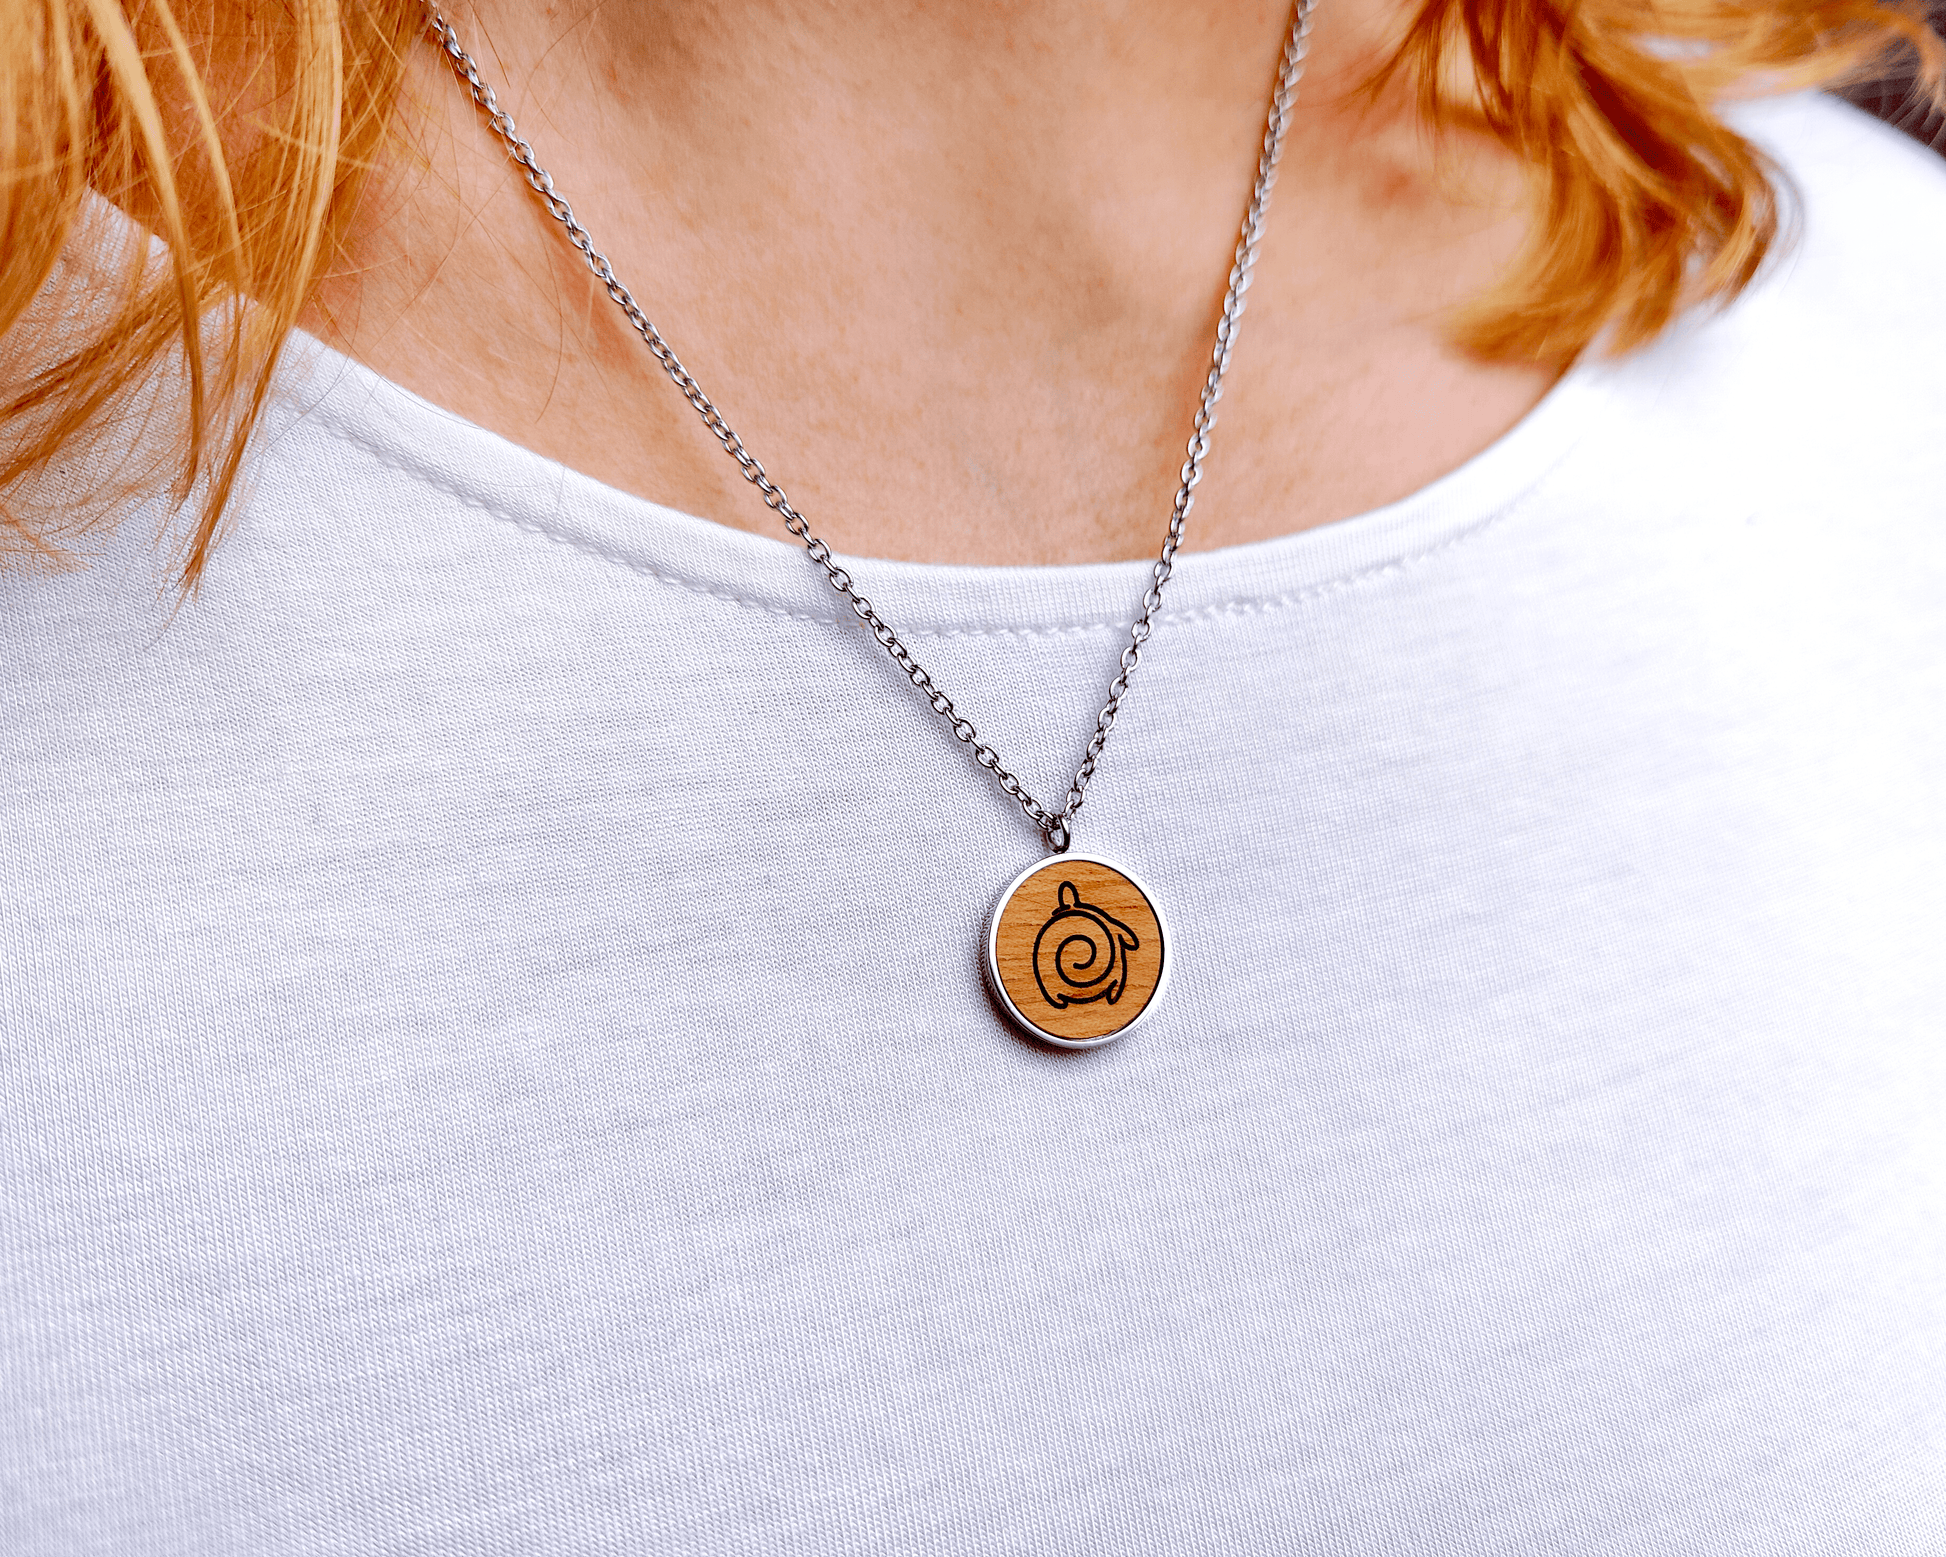 Nut wood turtle pendant necklace with stainless steel chain. All our eco-friendly necklaces are delivered in FSC certified jewelry boxes with sustainable foam.